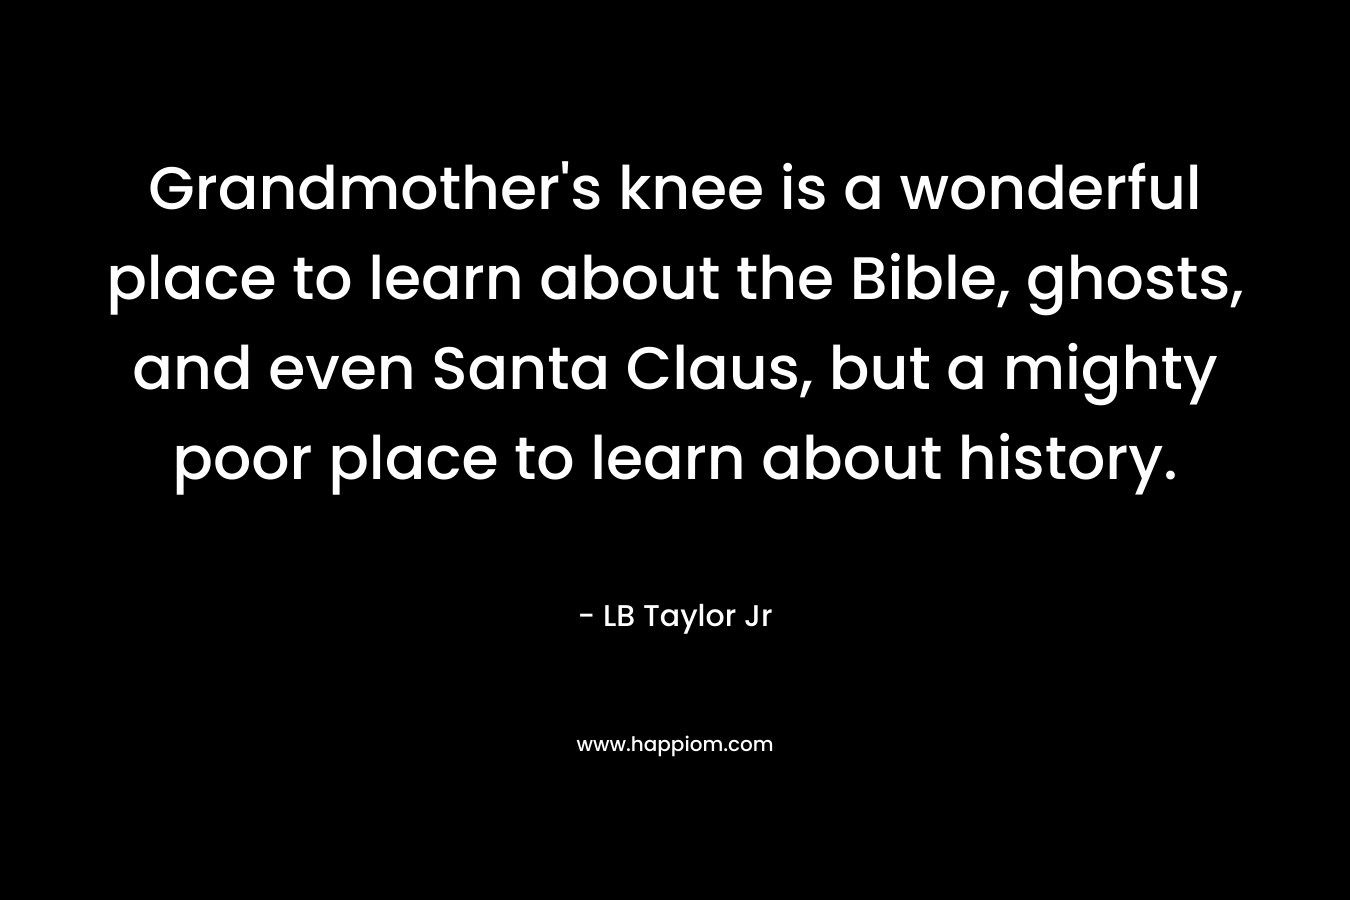 Grandmother's knee is a wonderful place to learn about the Bible, ghosts, and even Santa Claus, but a mighty poor place to learn about history.